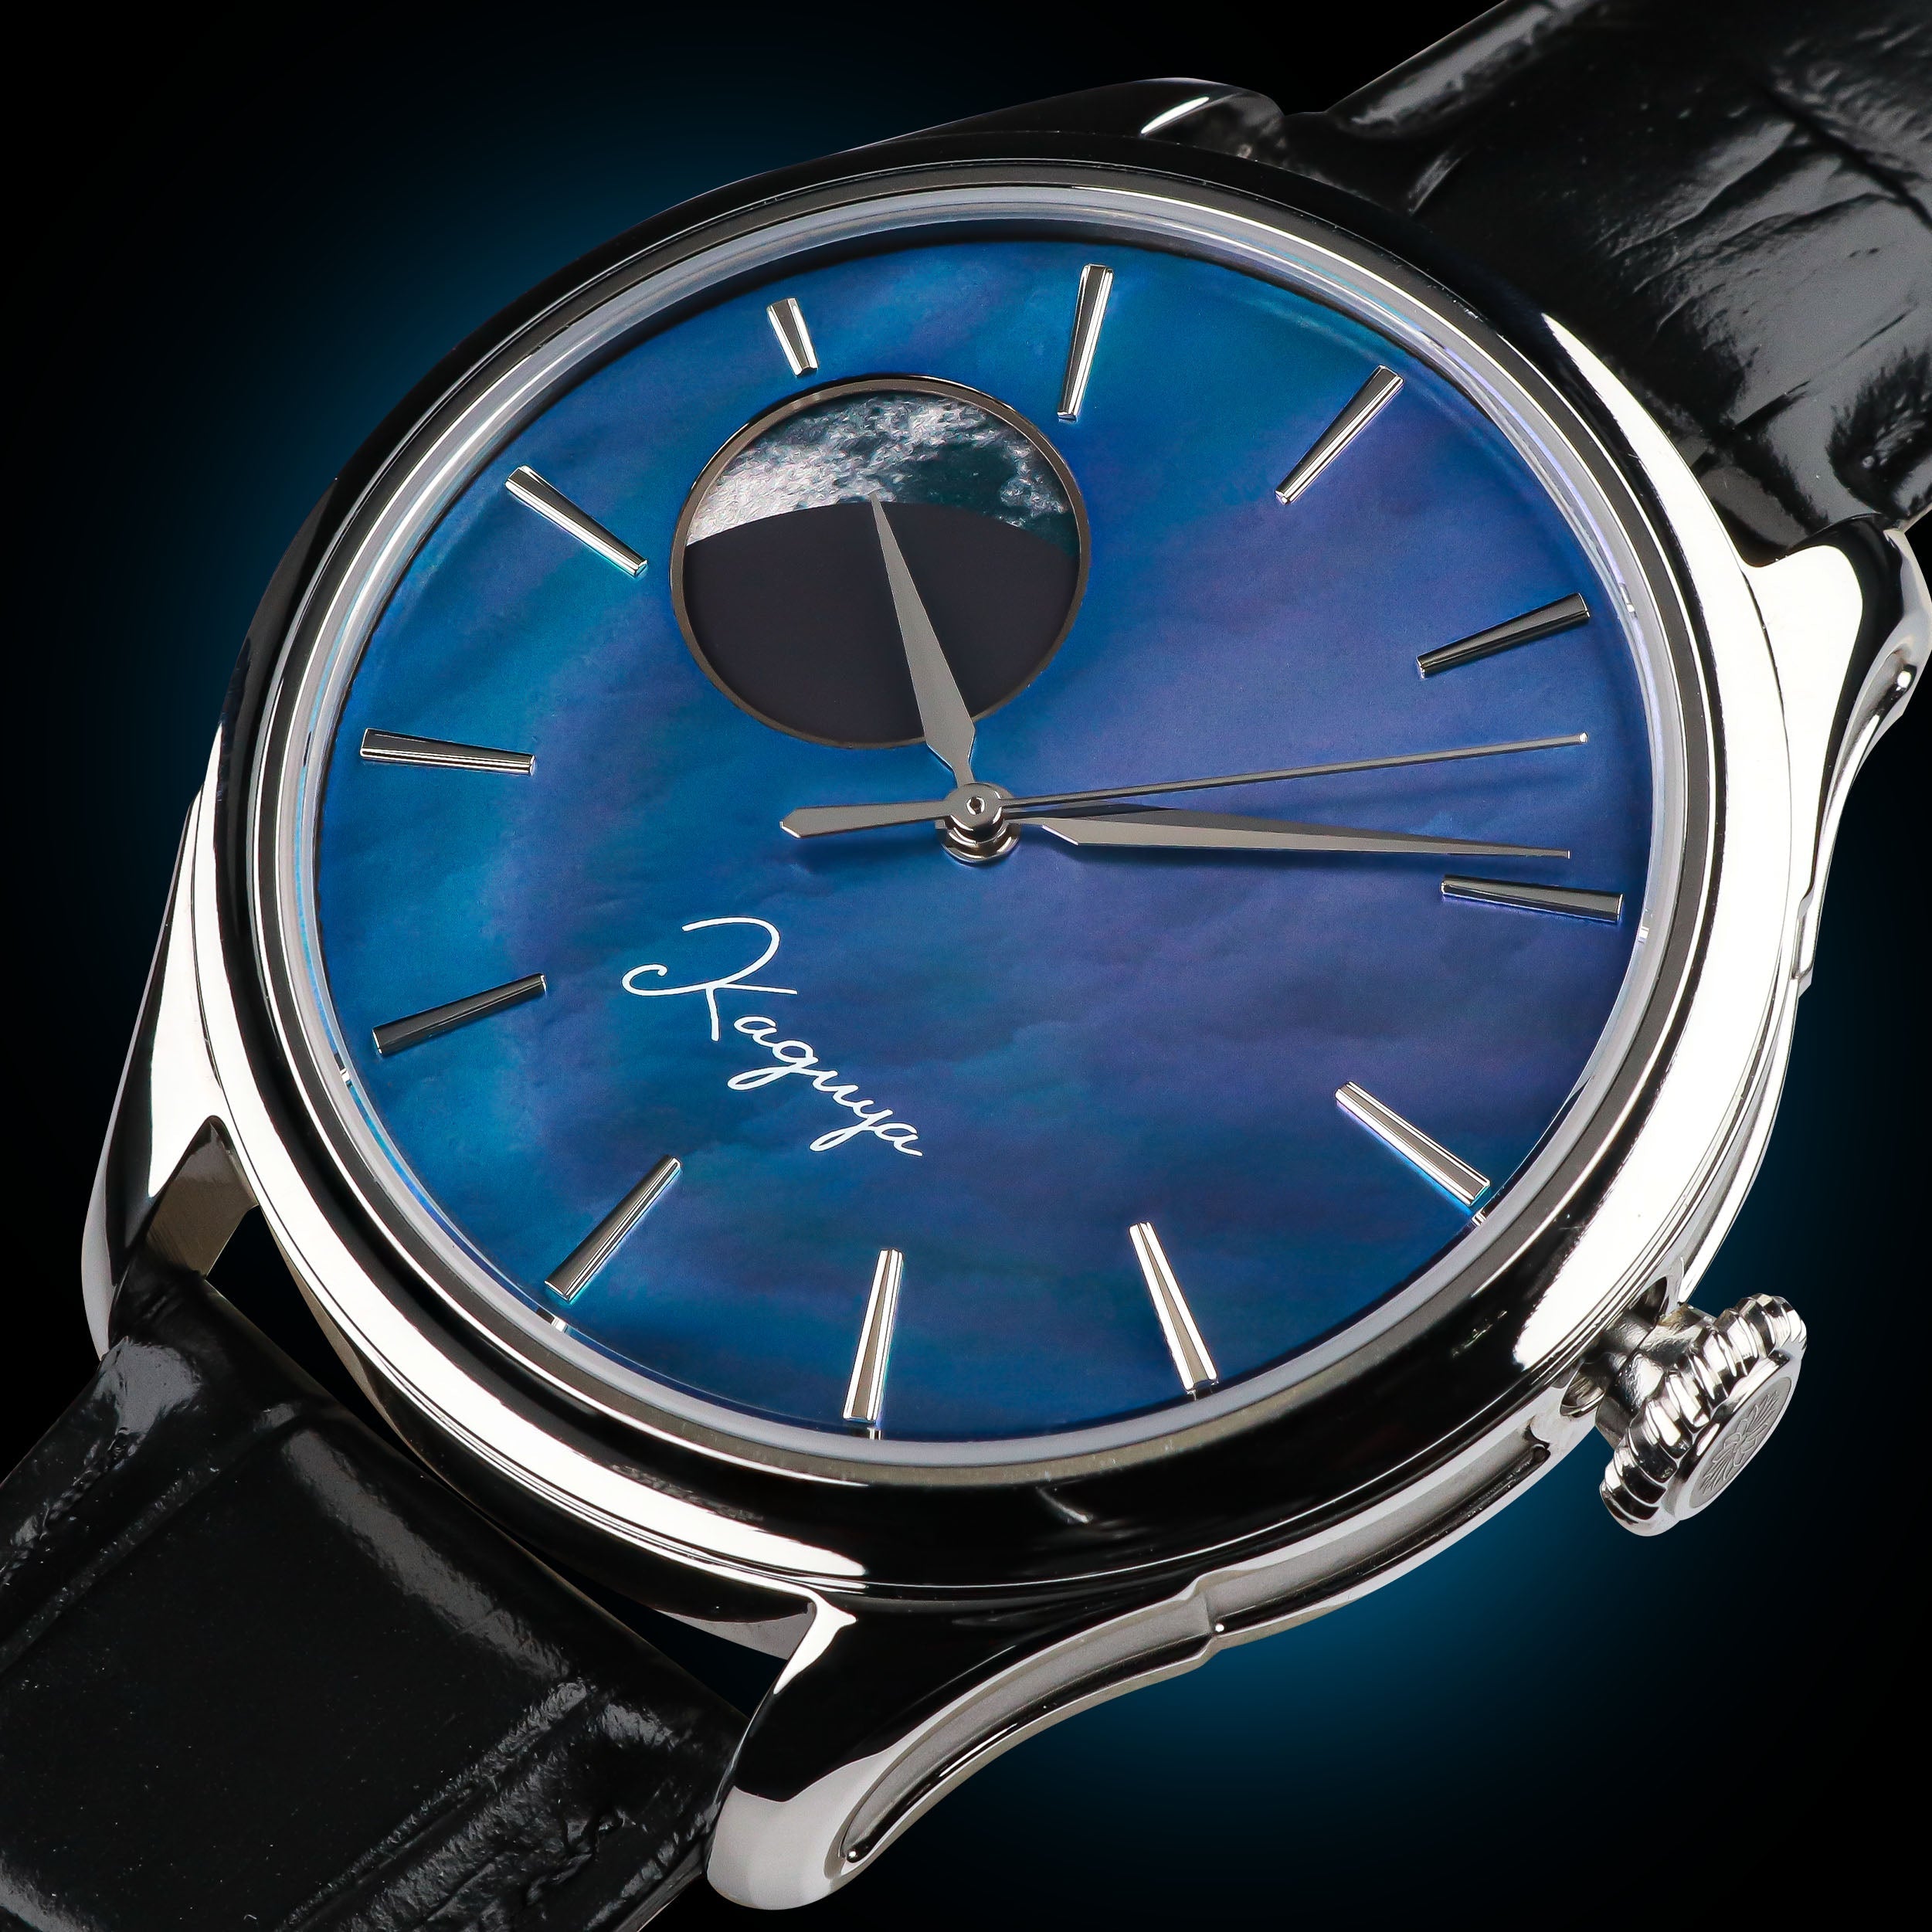 Experience the enchanting Dream Moonphase Kaguya Murasaki Blue - a captivating automatic watch with H7M01 movement and a mesmerizing moonphase feature. Embellished with a Mother of Pearl Blue Raden Dial, this Wancher timepiece tells the timeless story of Princess Kaguya. Immerse yourself in elegance and craftsmanship with this exquisite moonphase watch